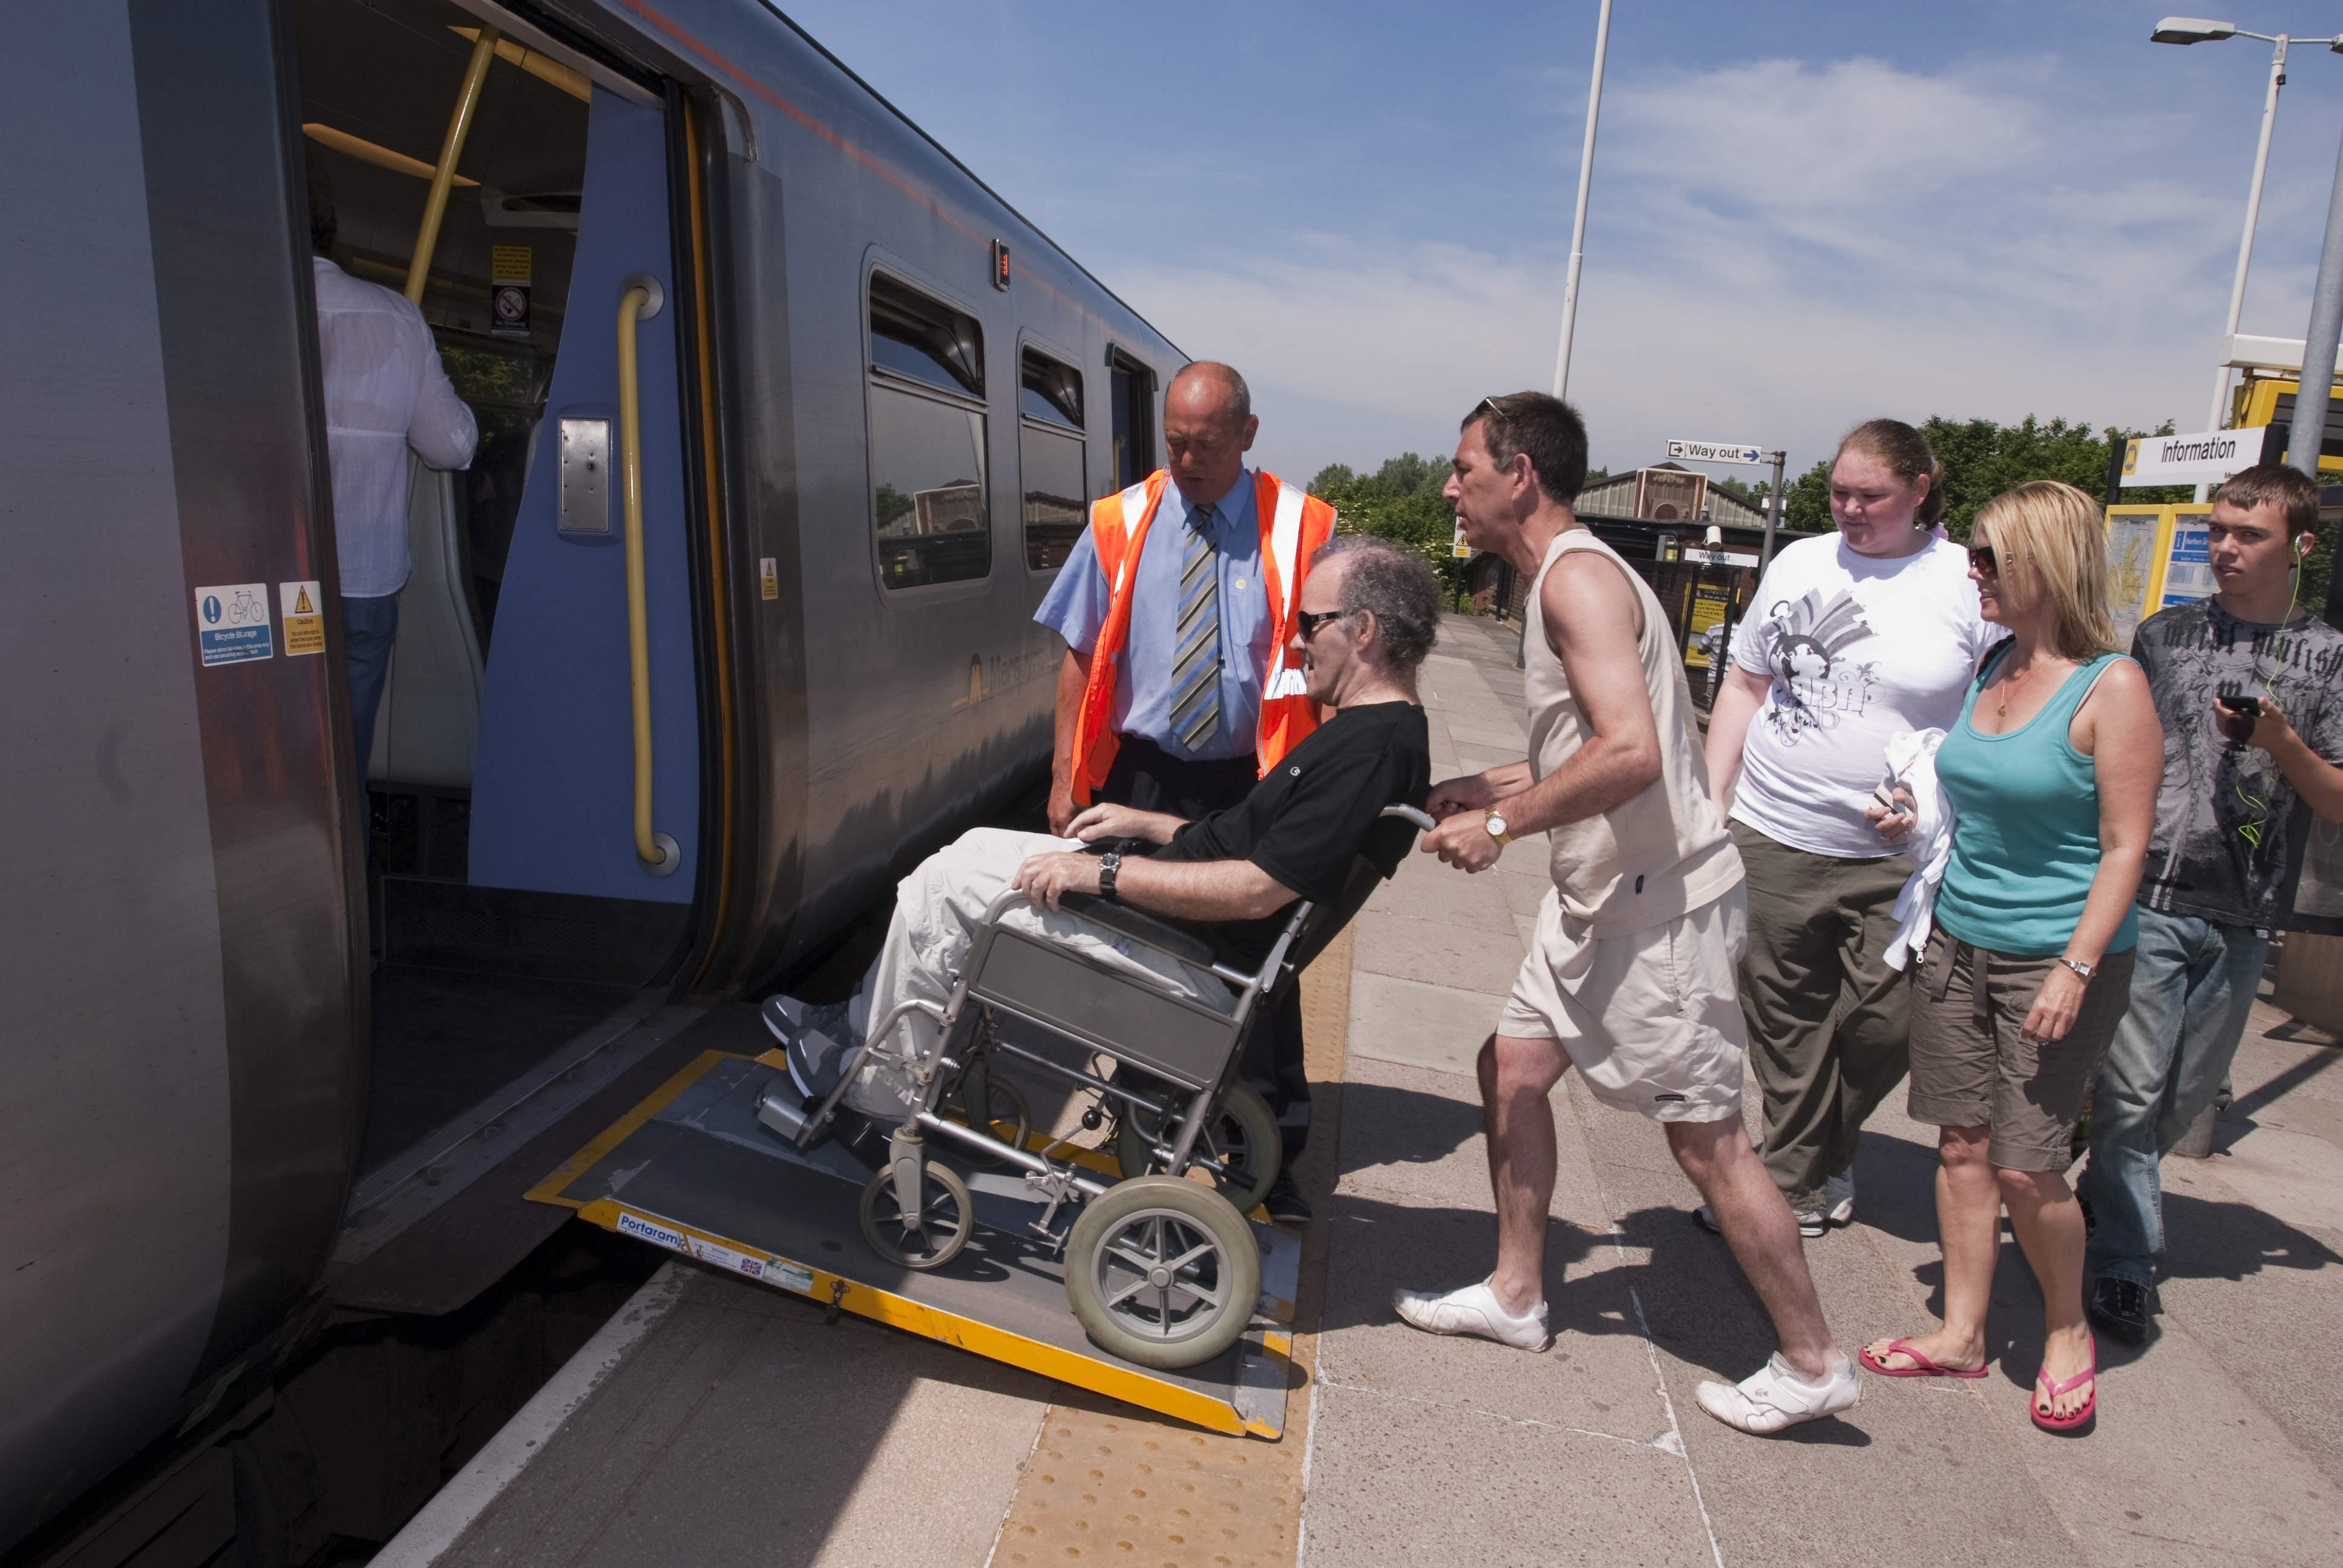 Disabled passenger being helped onto a train.